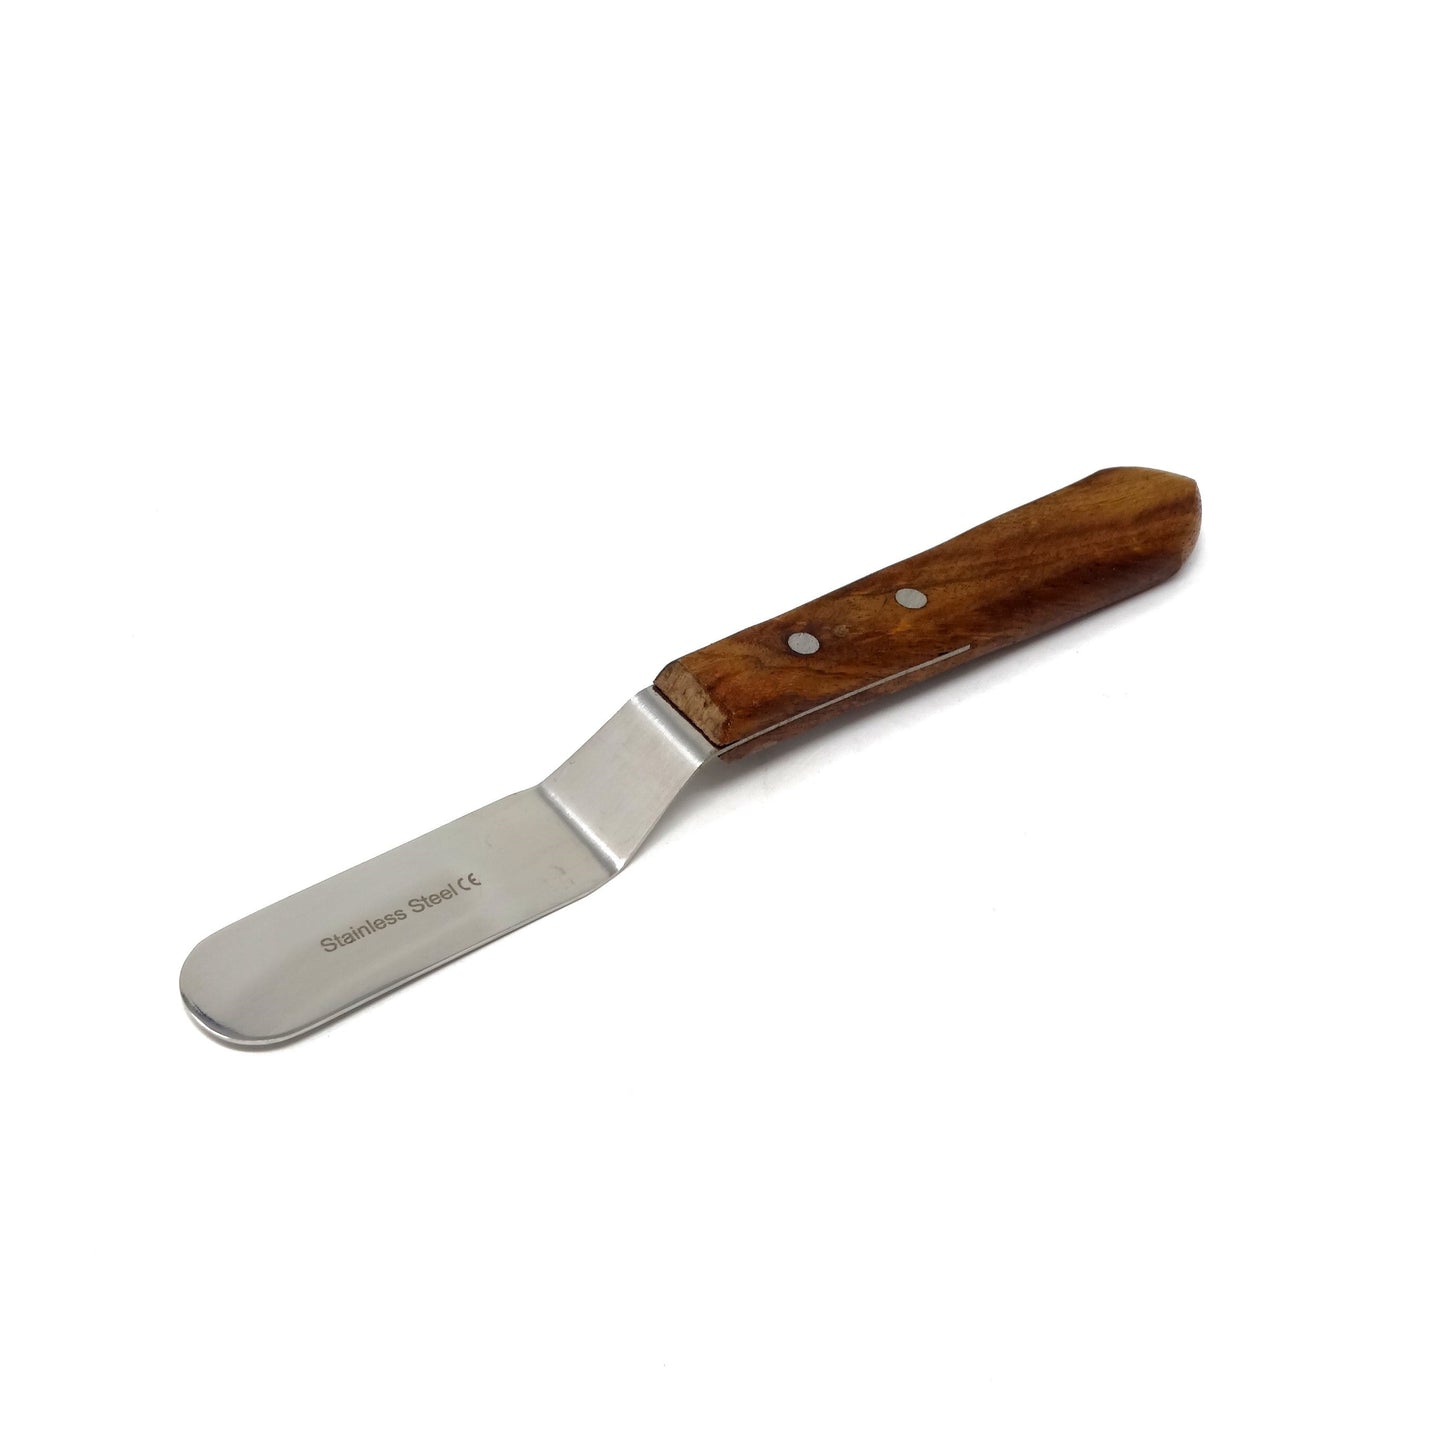 Stainless Steel Lab Spatula with Wooden Handle, 3" Offset Bayonet Blade, 7" Total Length